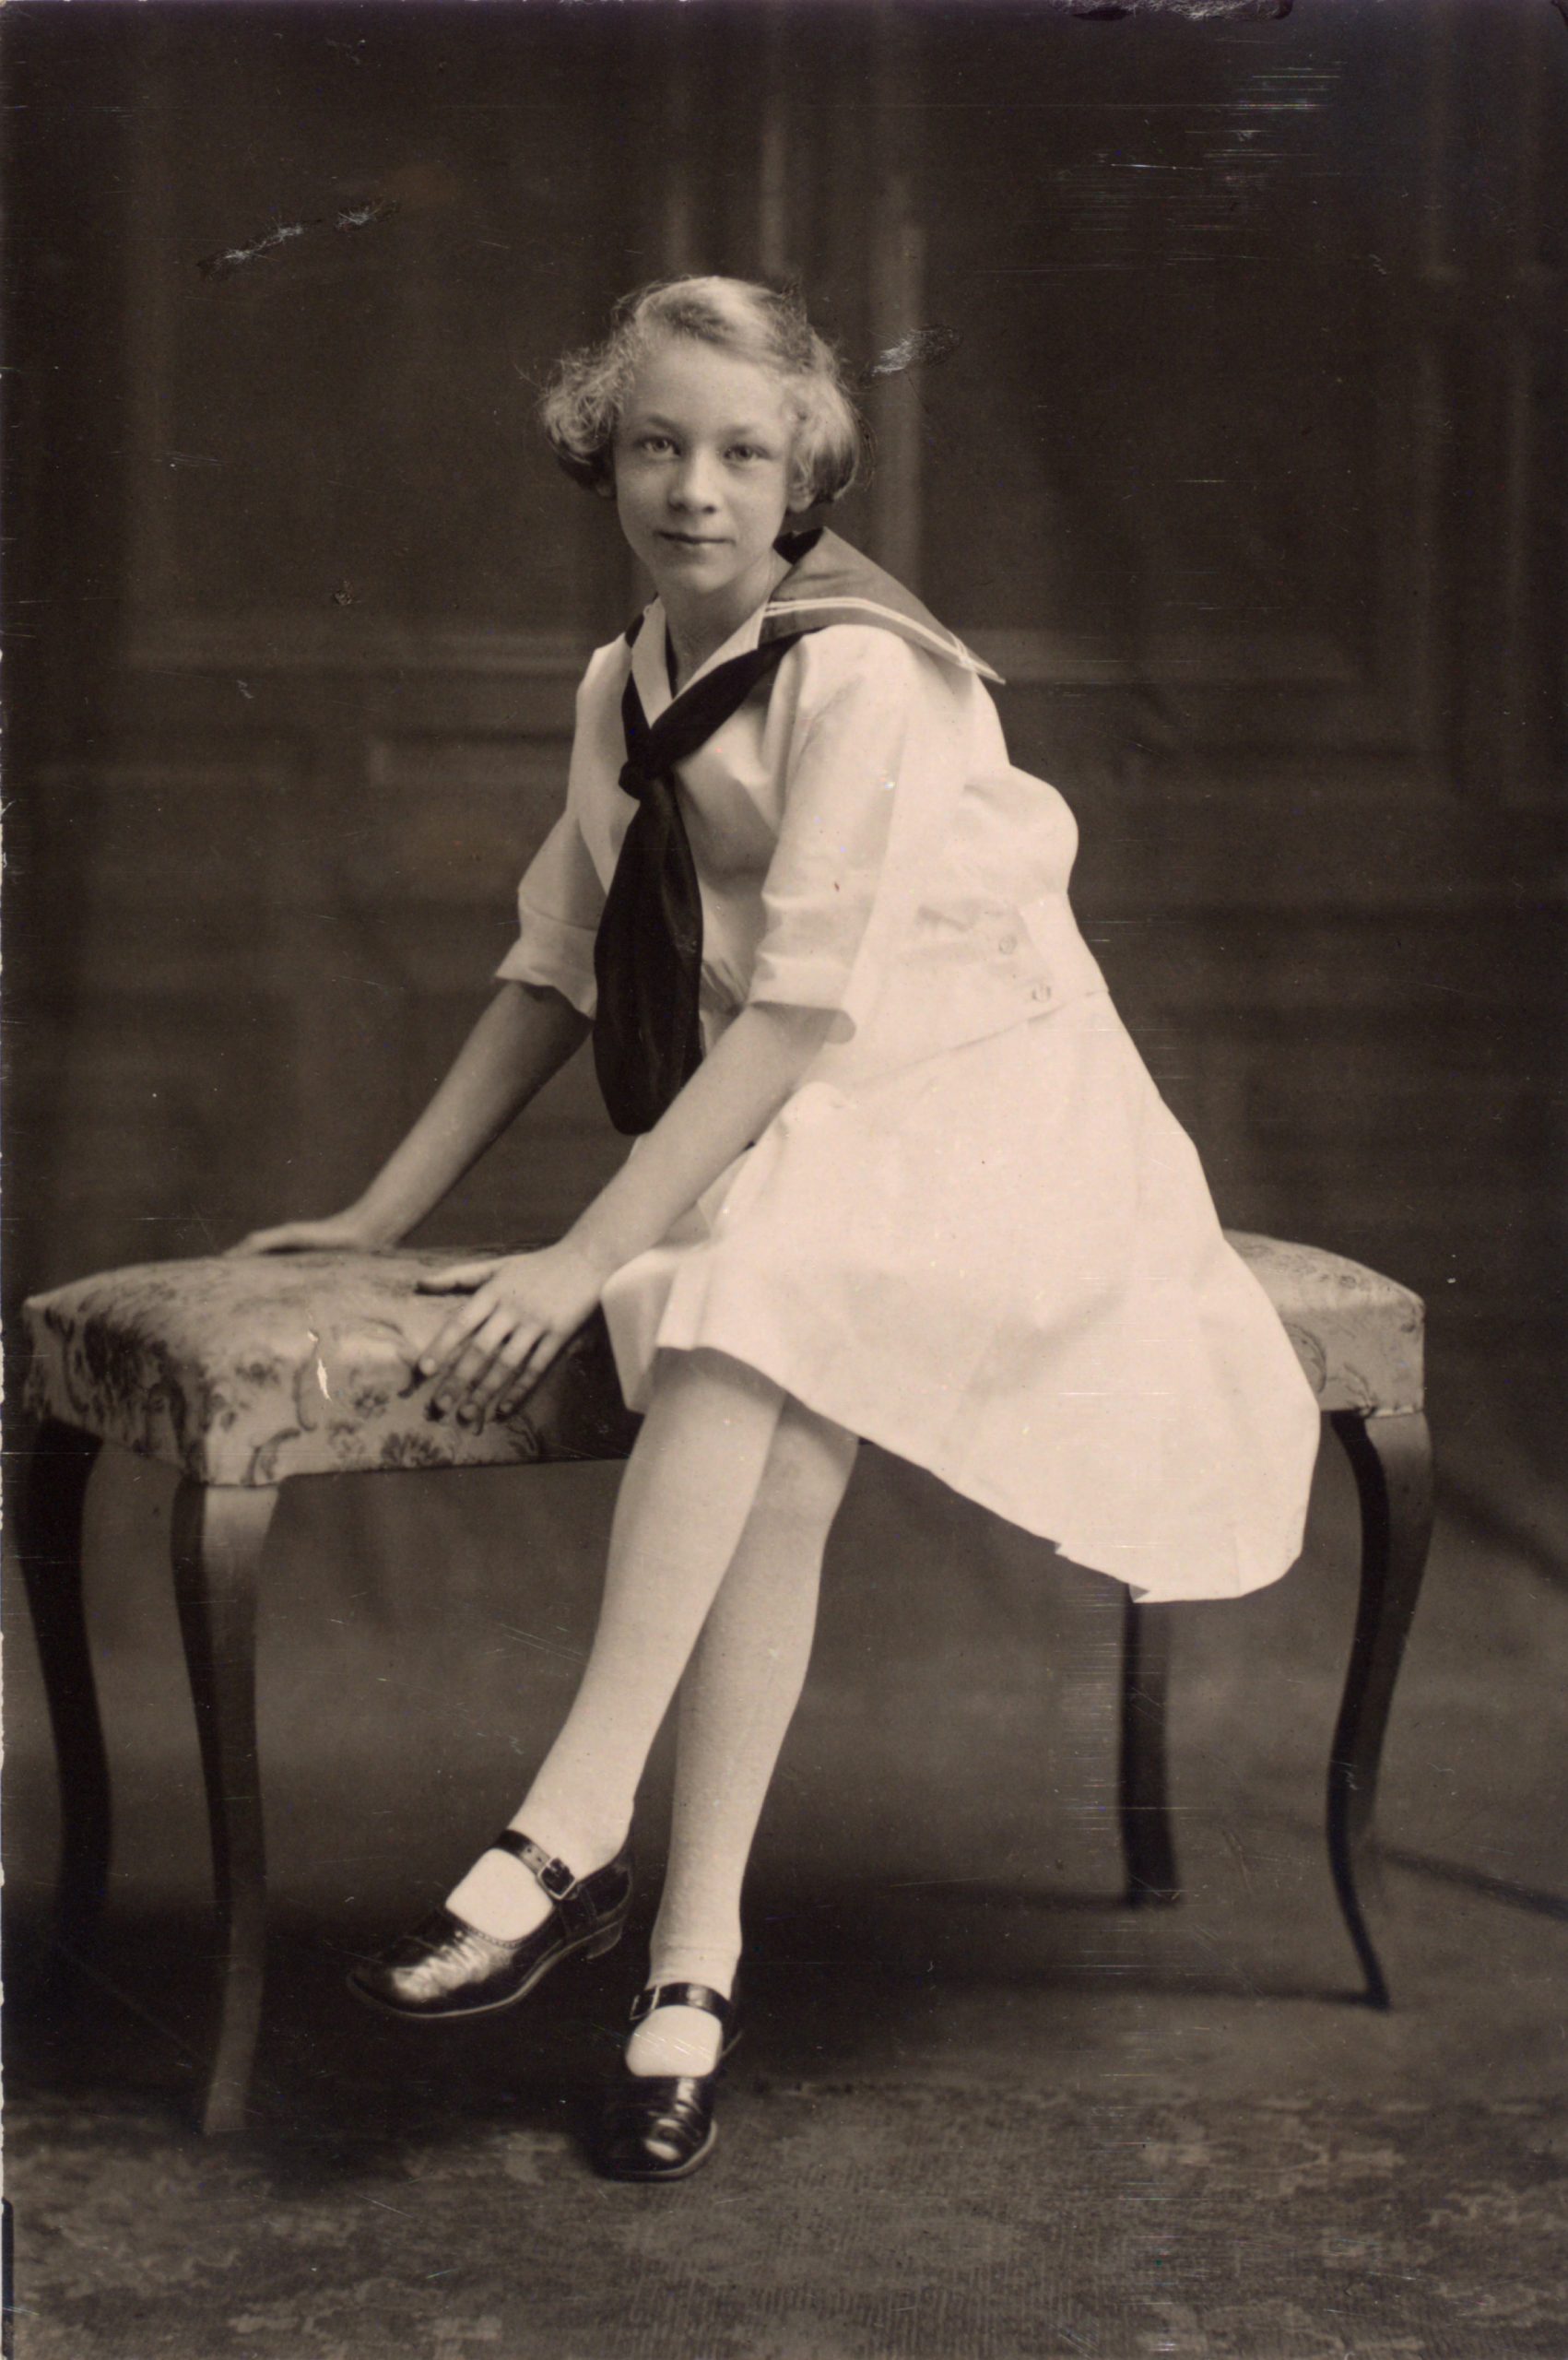 A black and white portrait of a young lady seated on a bench.